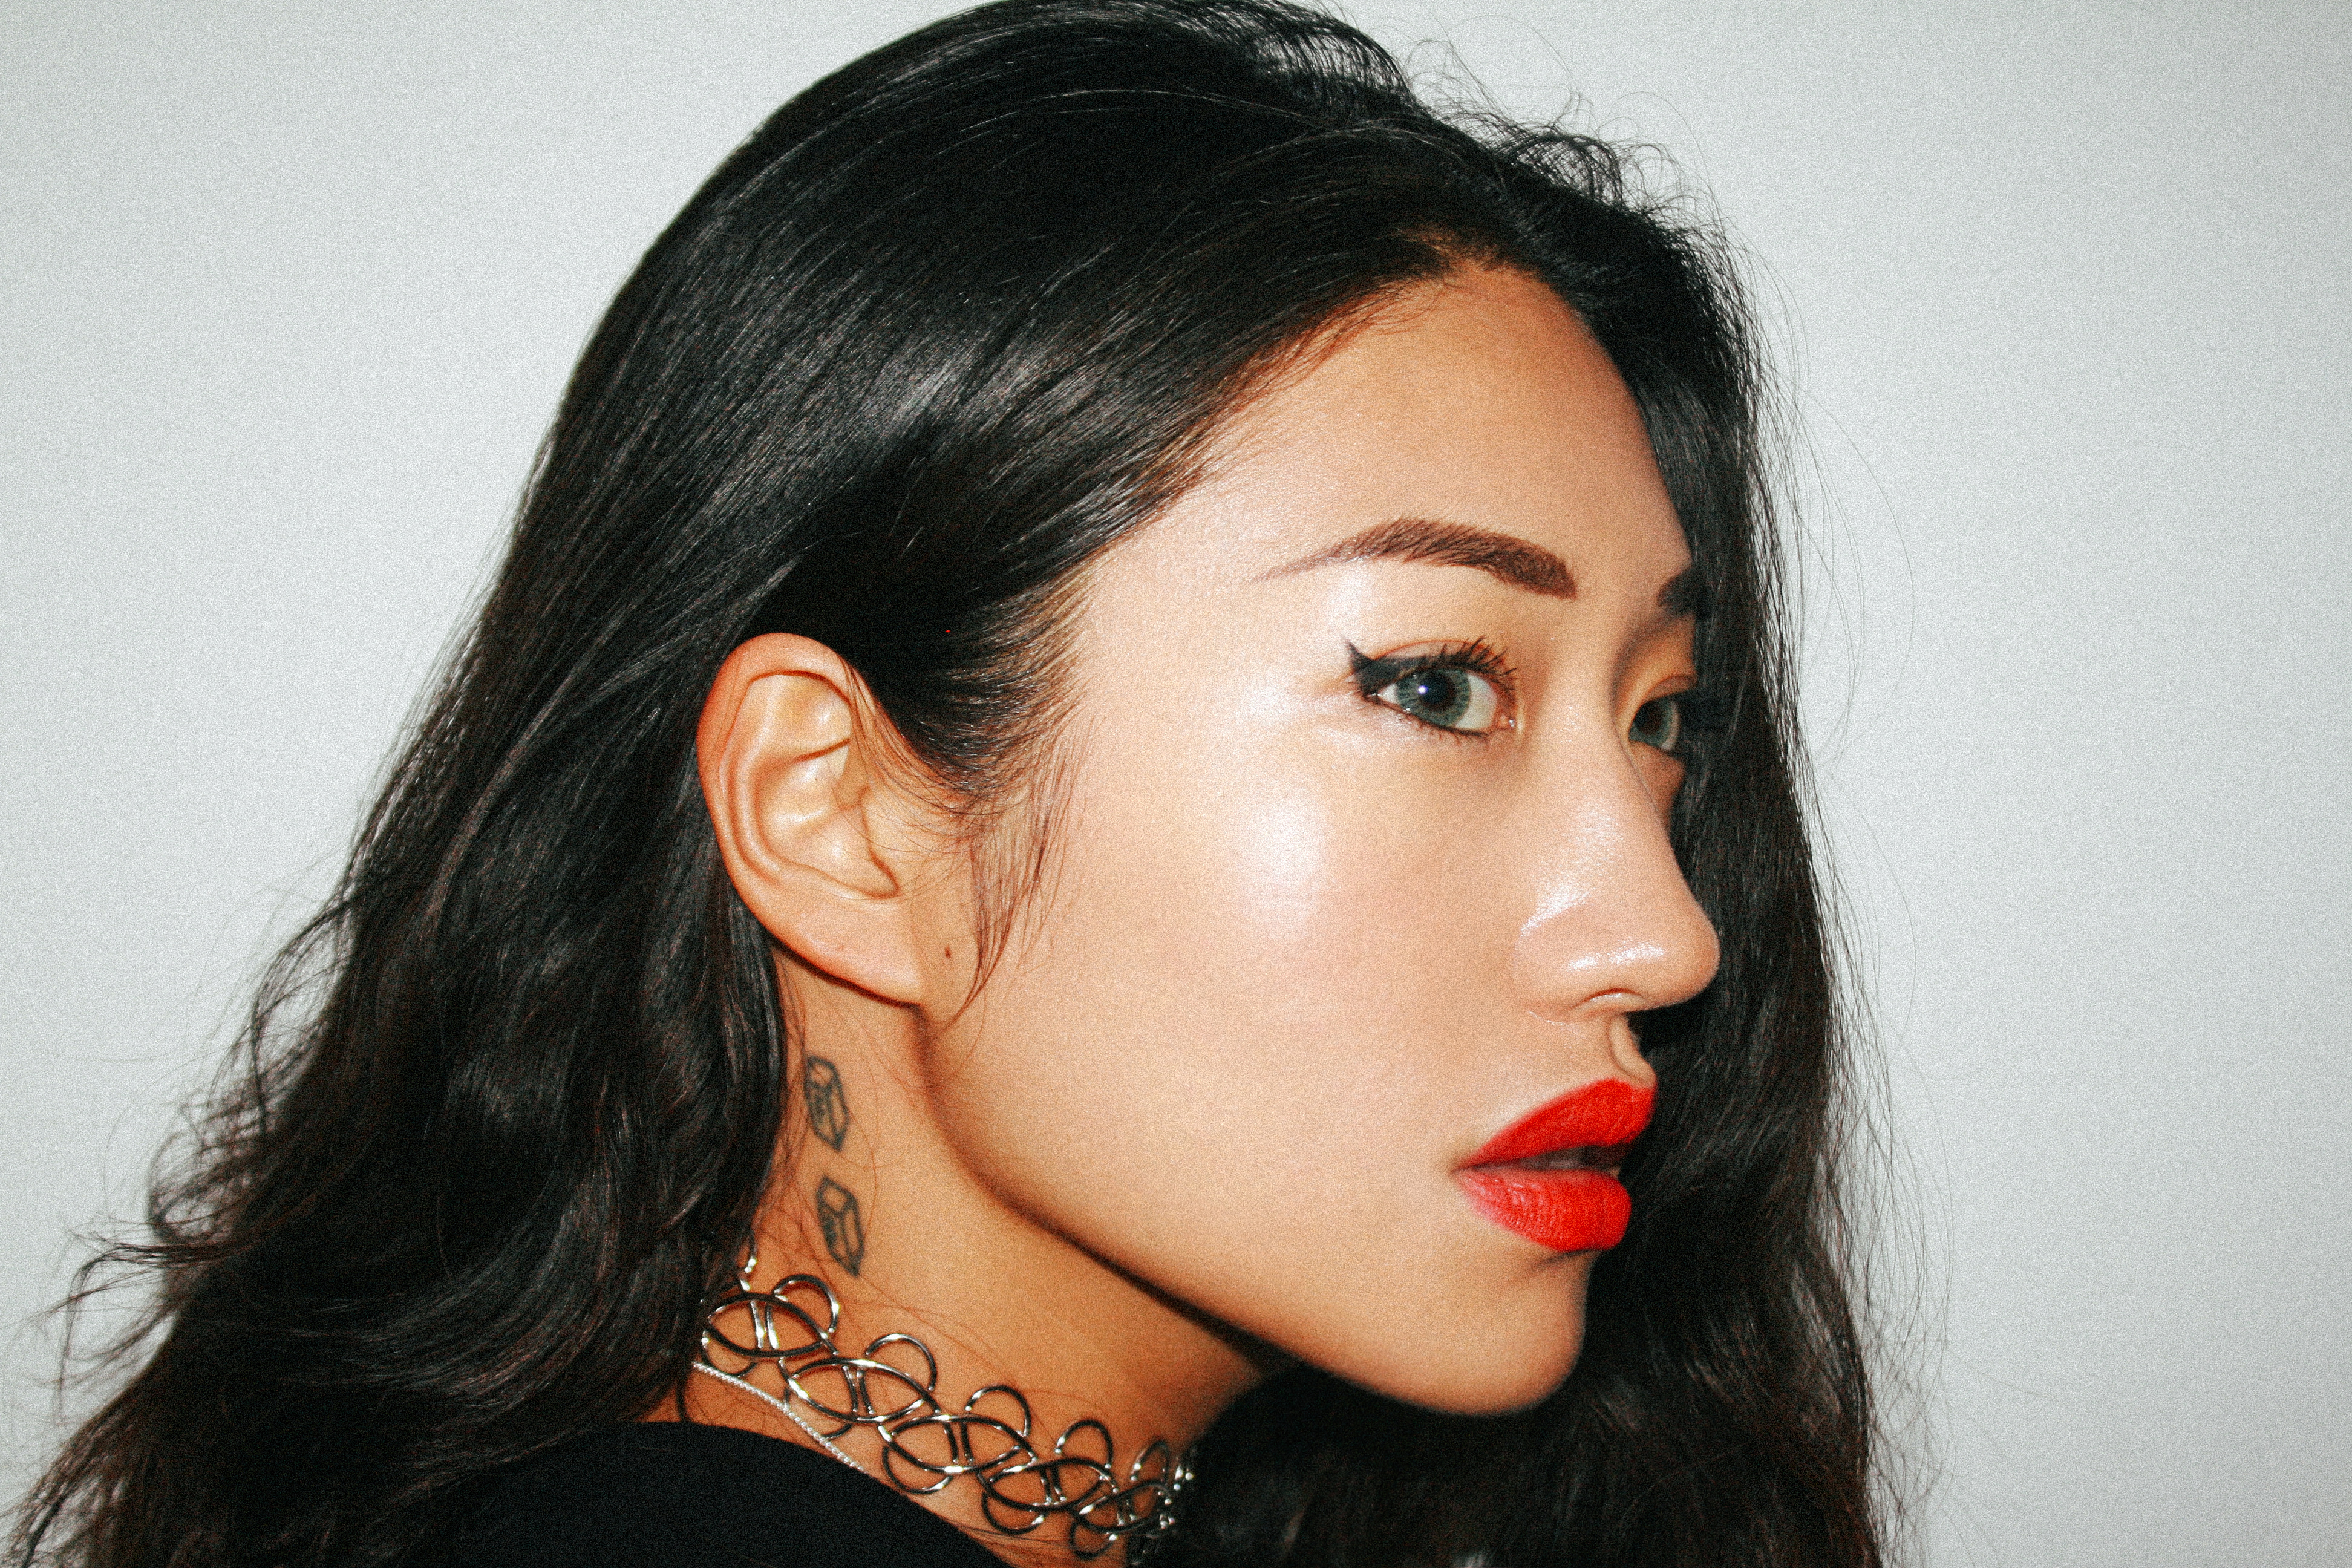 20 Things You Didn't Know About Peggy Gou - Only Techno